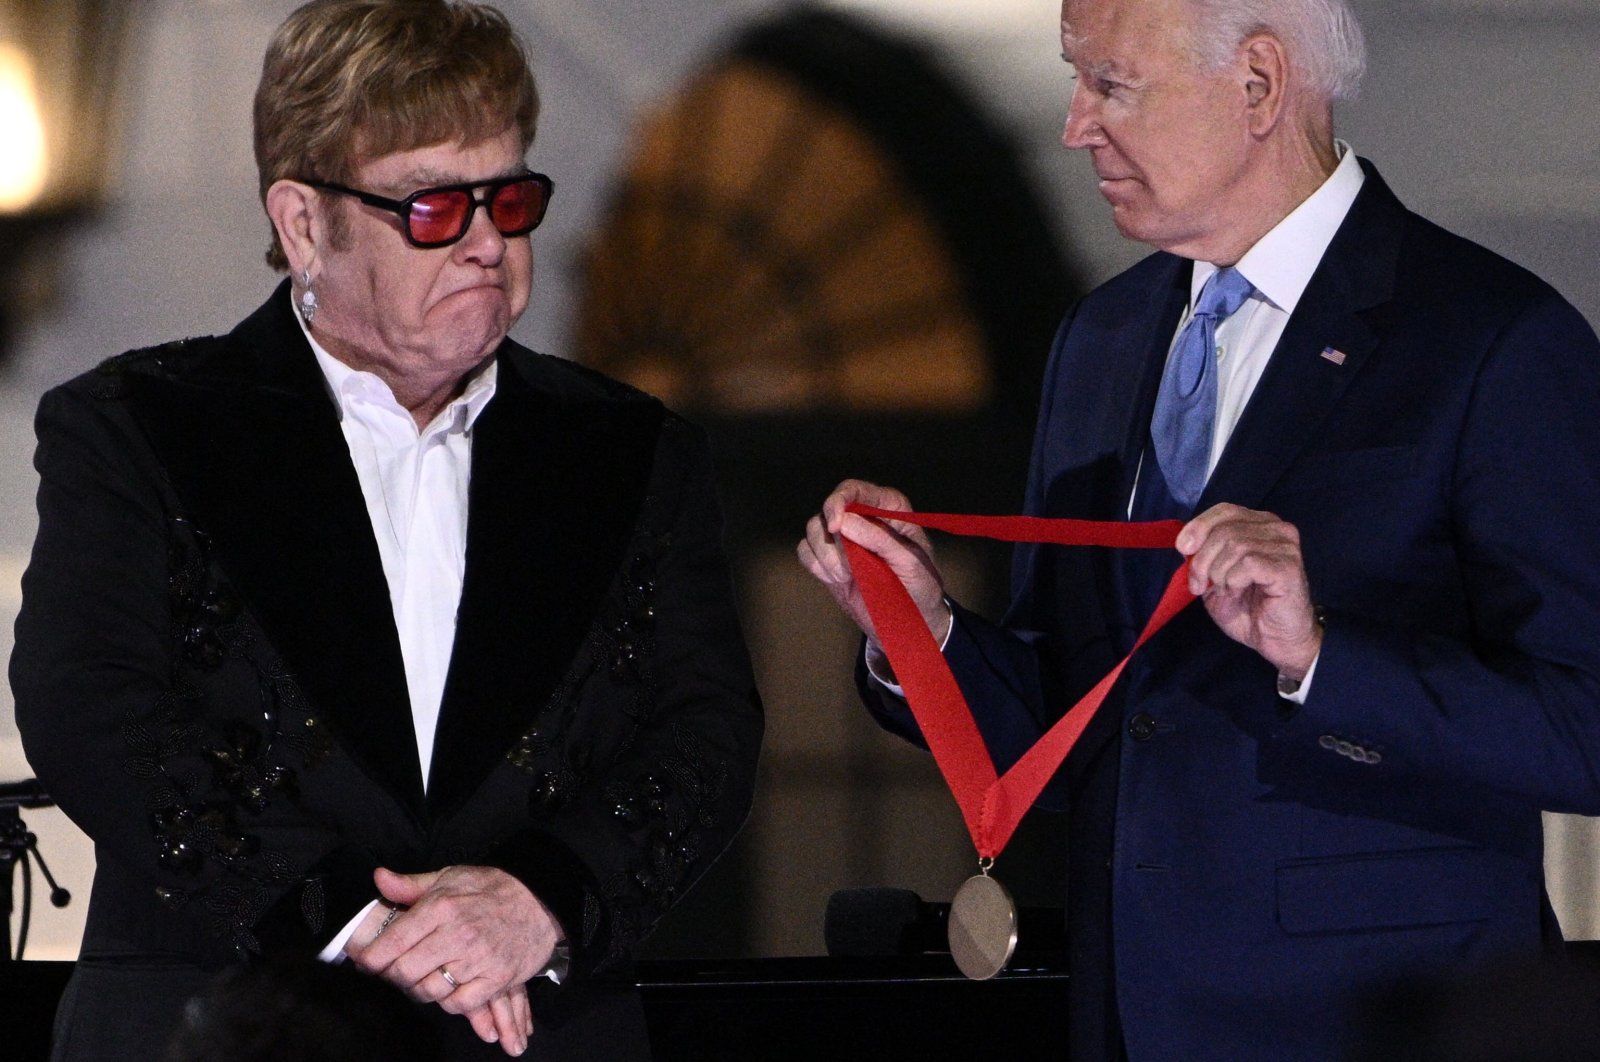 British singer Elton John gets emotional as U.S. President Joe Biden presents him with the National Humanities Medal at the end of &quot;A Night When Hope and History Rhyme&quot; at the White House in Washington, D.C., U.S., Sept. 23, 2022. (AFP Photo)